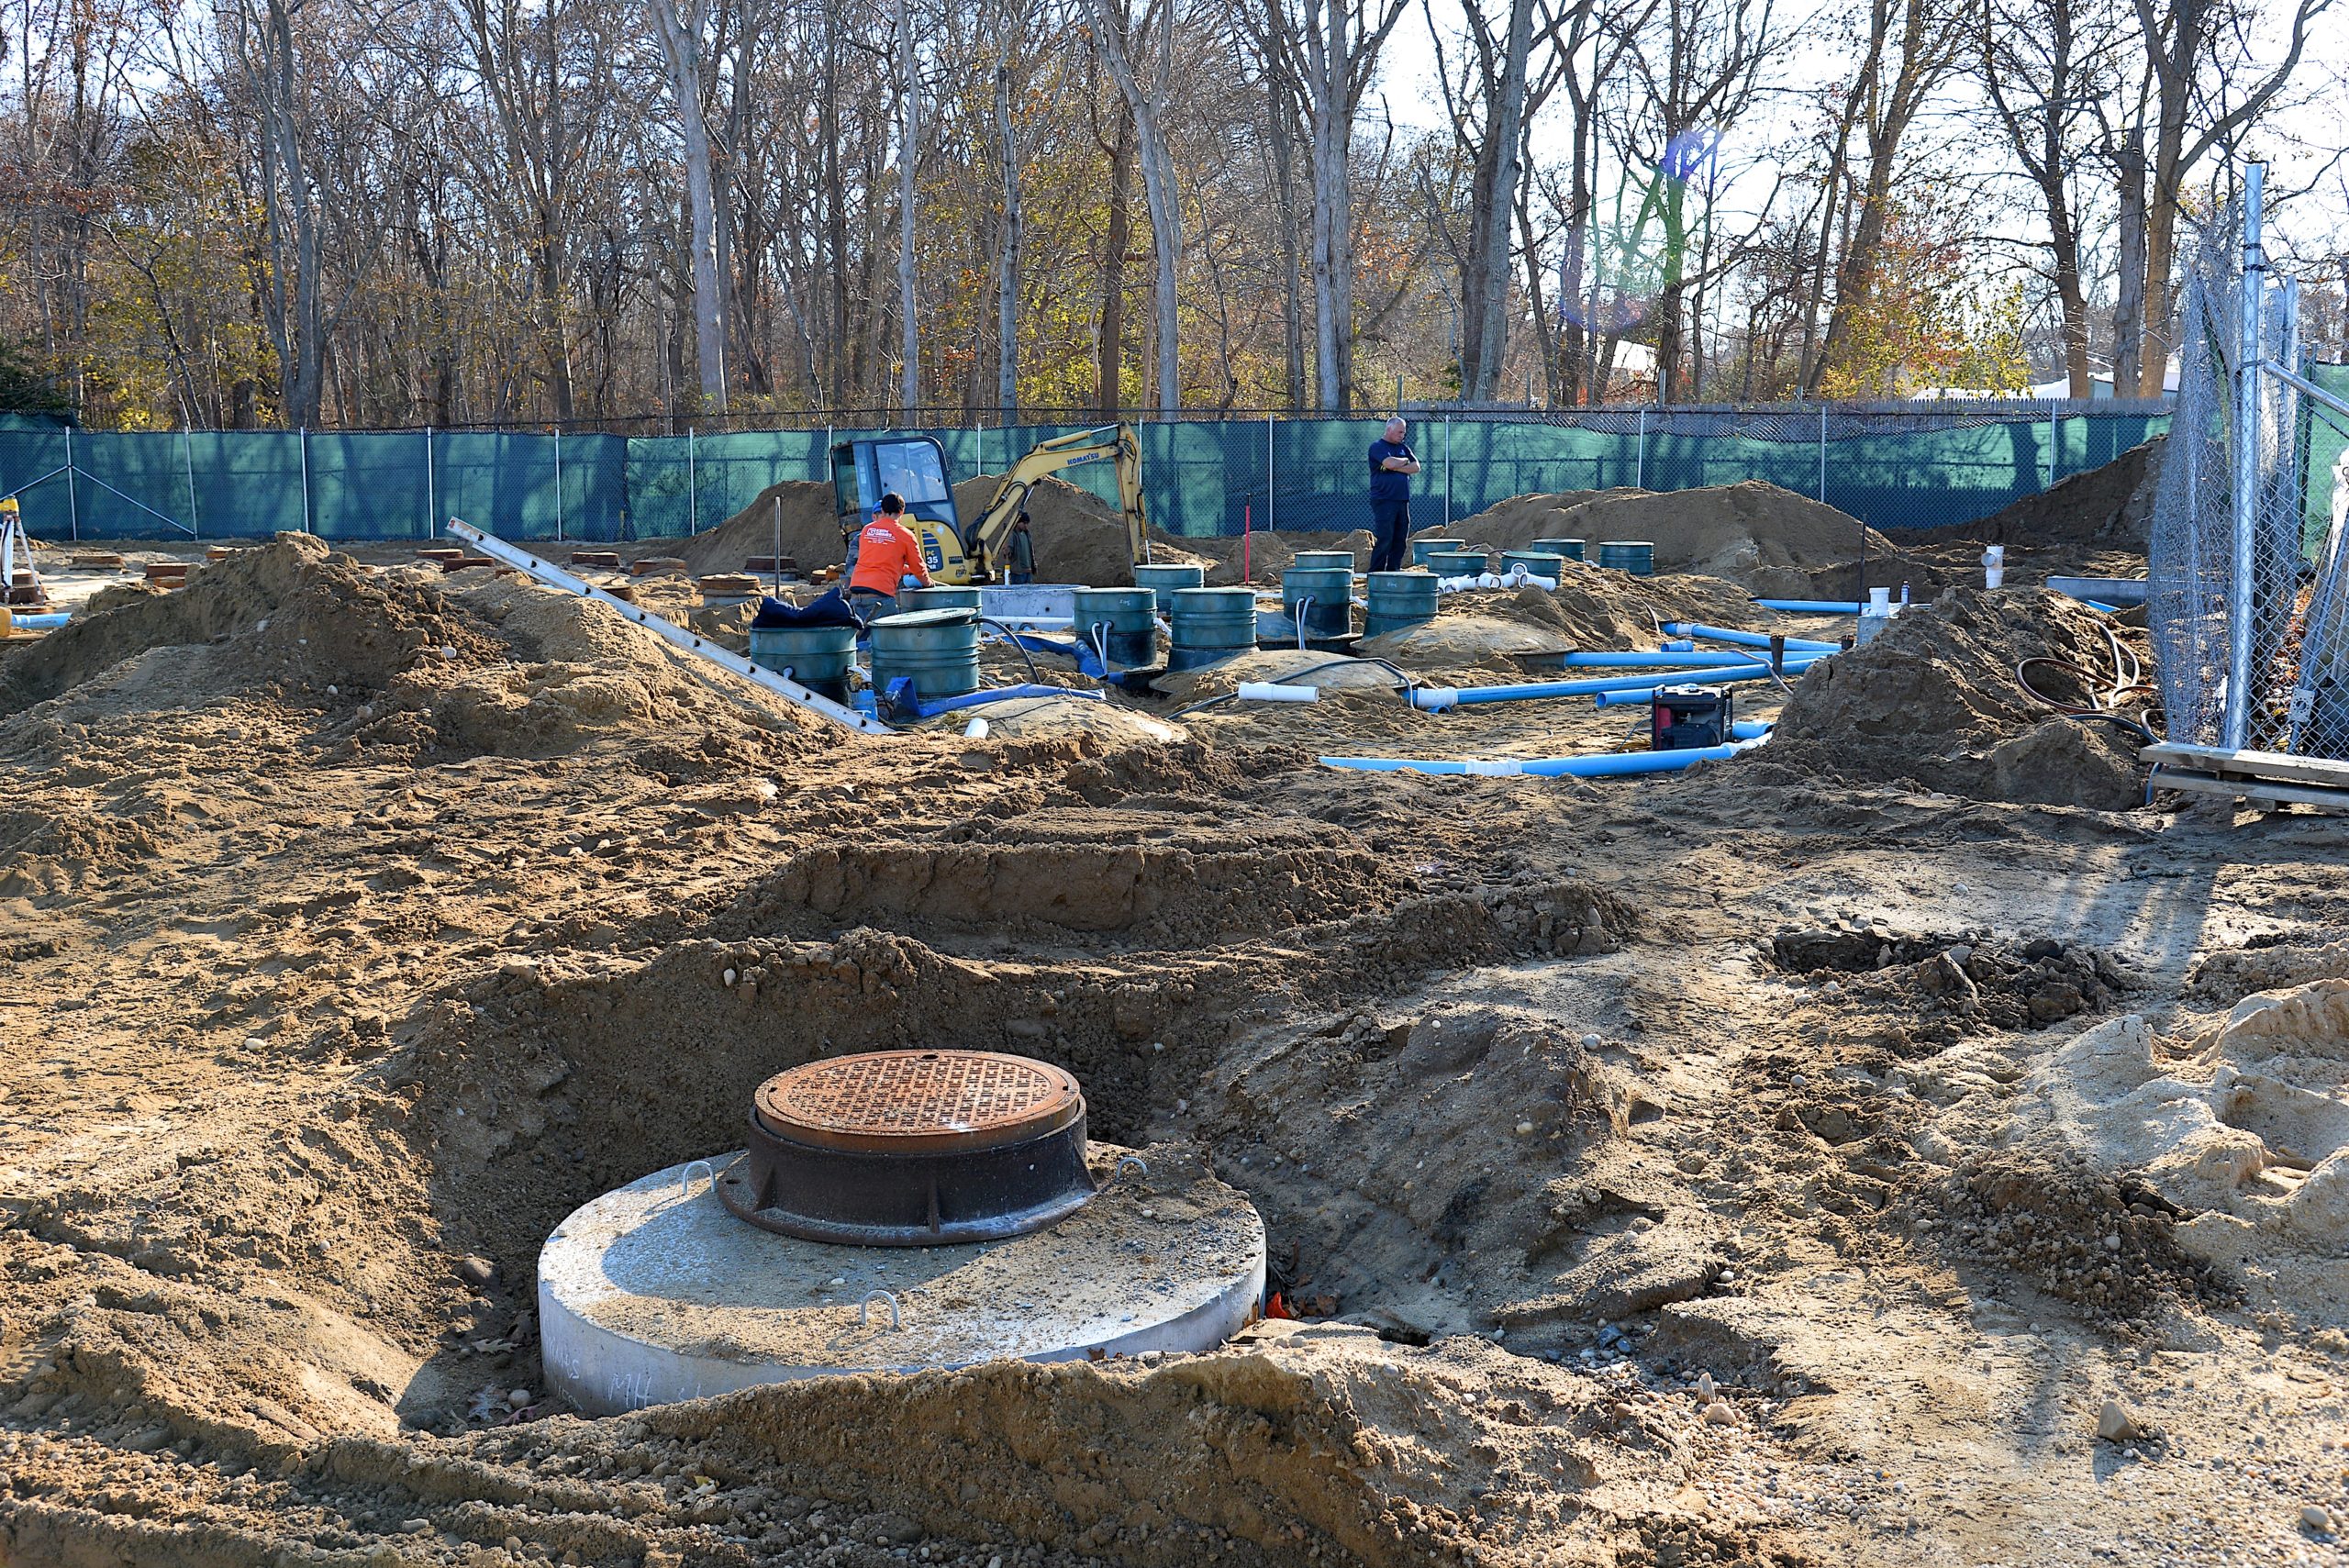 The Springs School is in the midst of a $1.6 million replacement of its septic system. East Hampton Town approved a $227,000 grant from the town's Community Preservation Fund to cover some of the costs. 